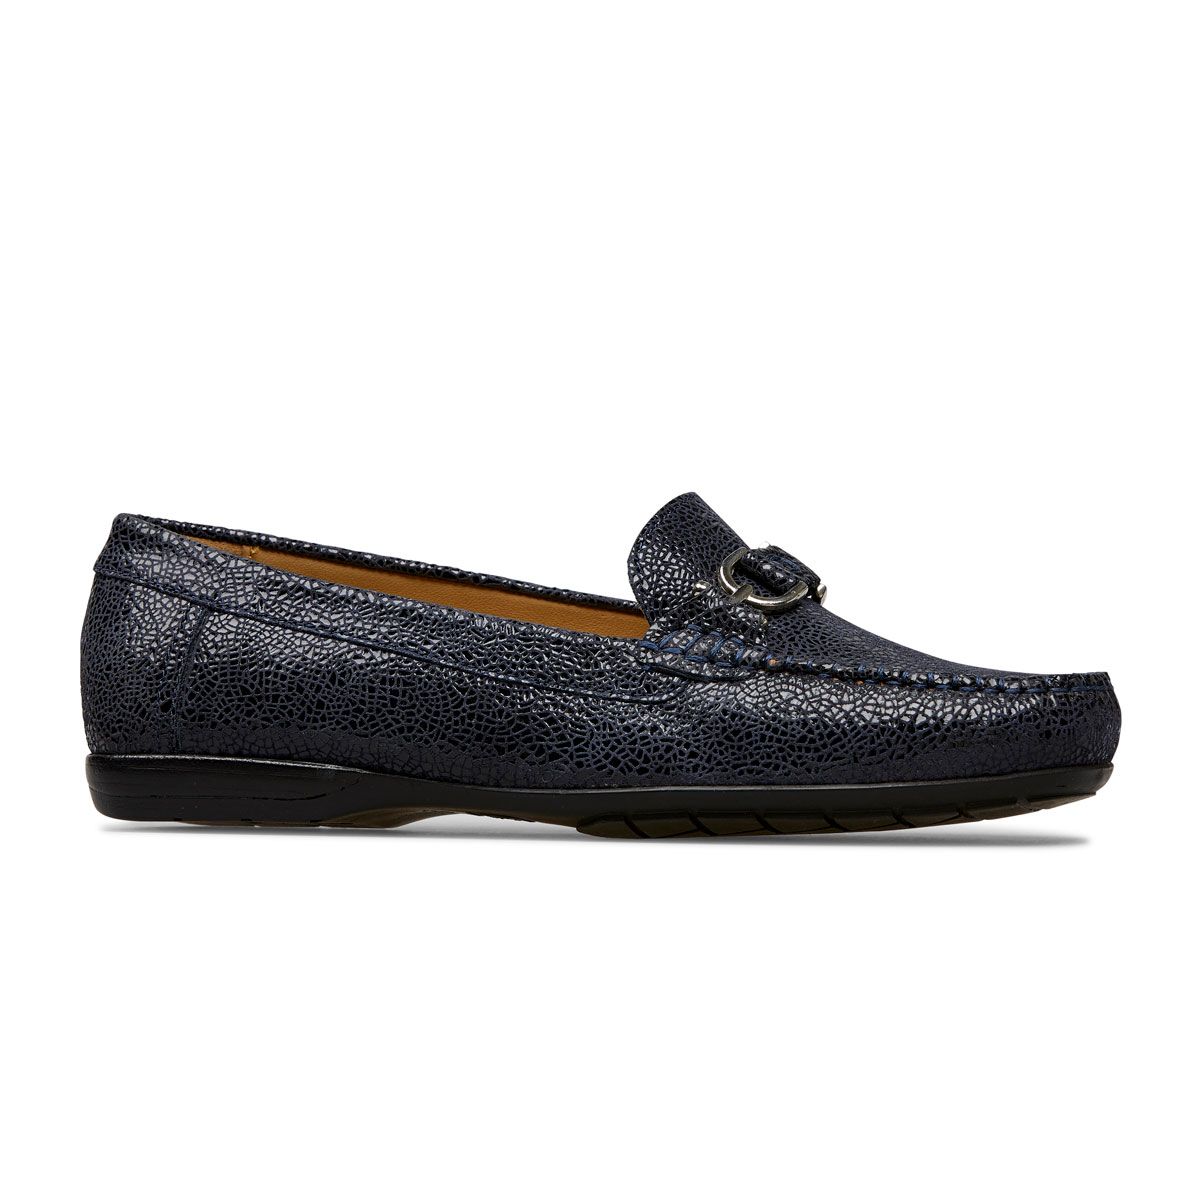 Van Dal Shoes - Bliss Wider Fitting Loafers in Midnight Crackle Print